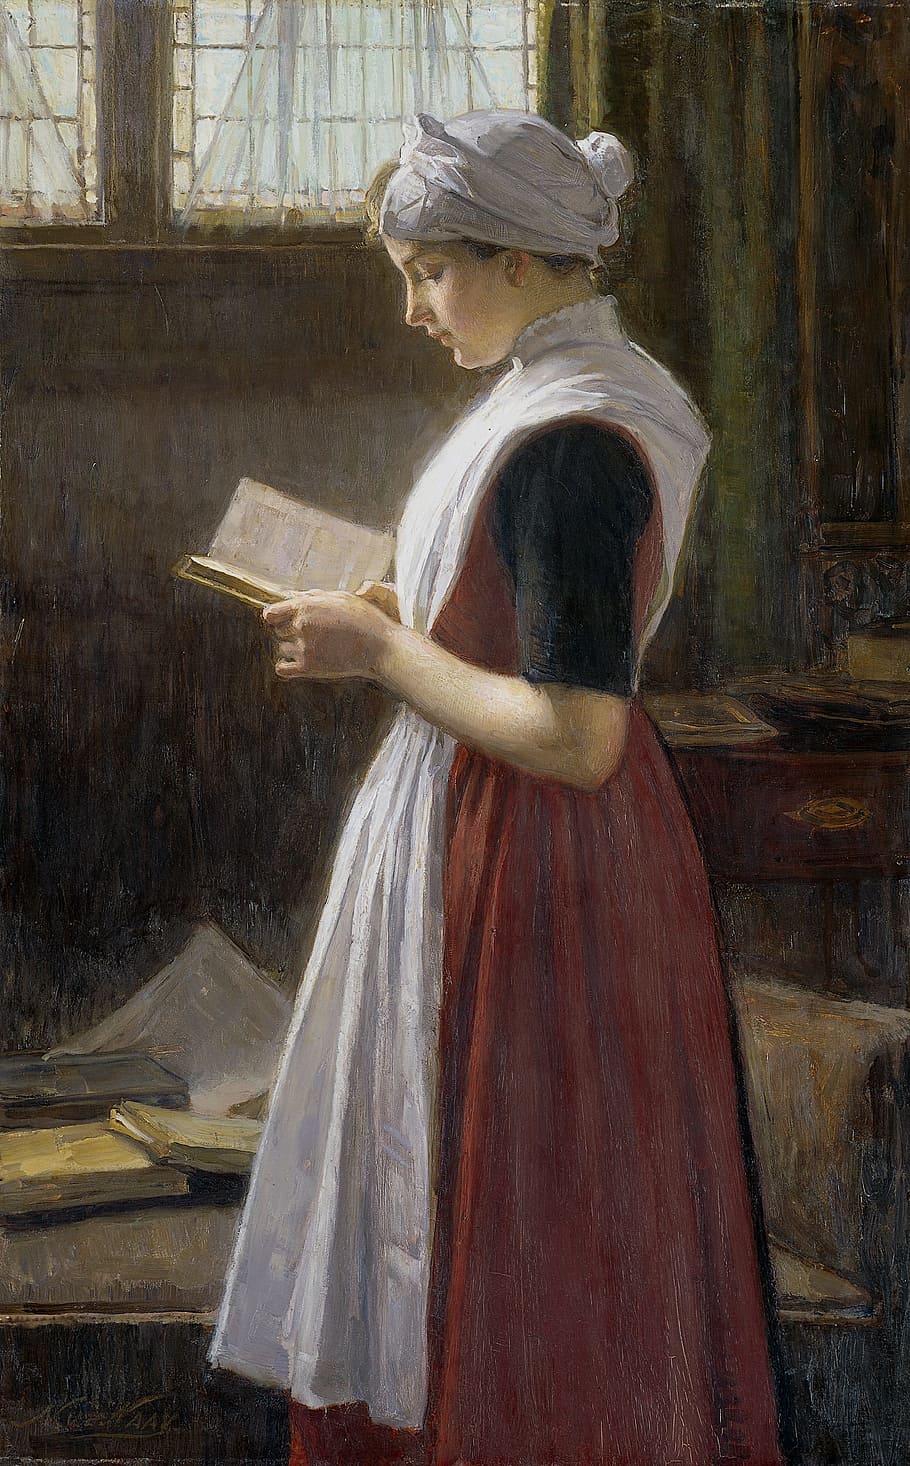 woman reading book painting, woman reading, reading book, painting, woman, reading, person, canvas, artwork, historic